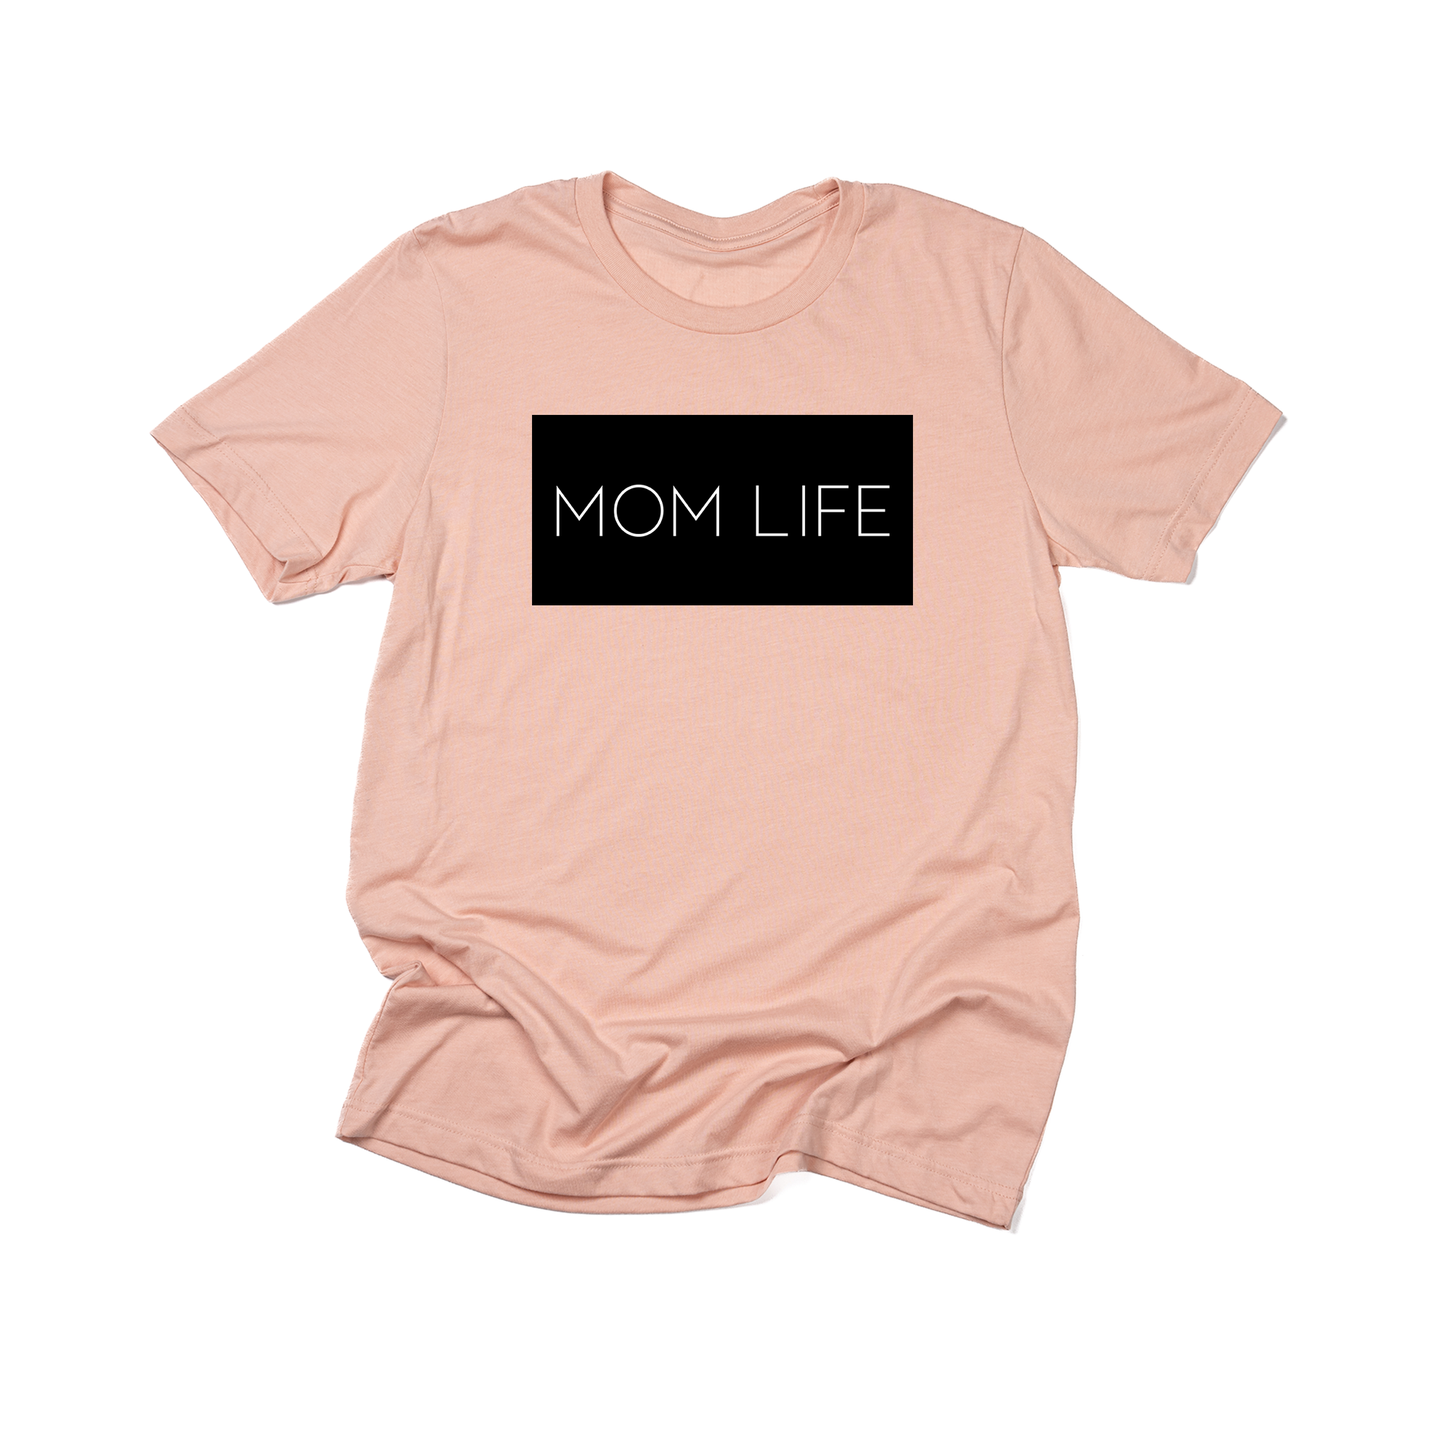 Mom Life (Boxed Collection, Black Box/White Text, Across Front) - Tee (Peach)